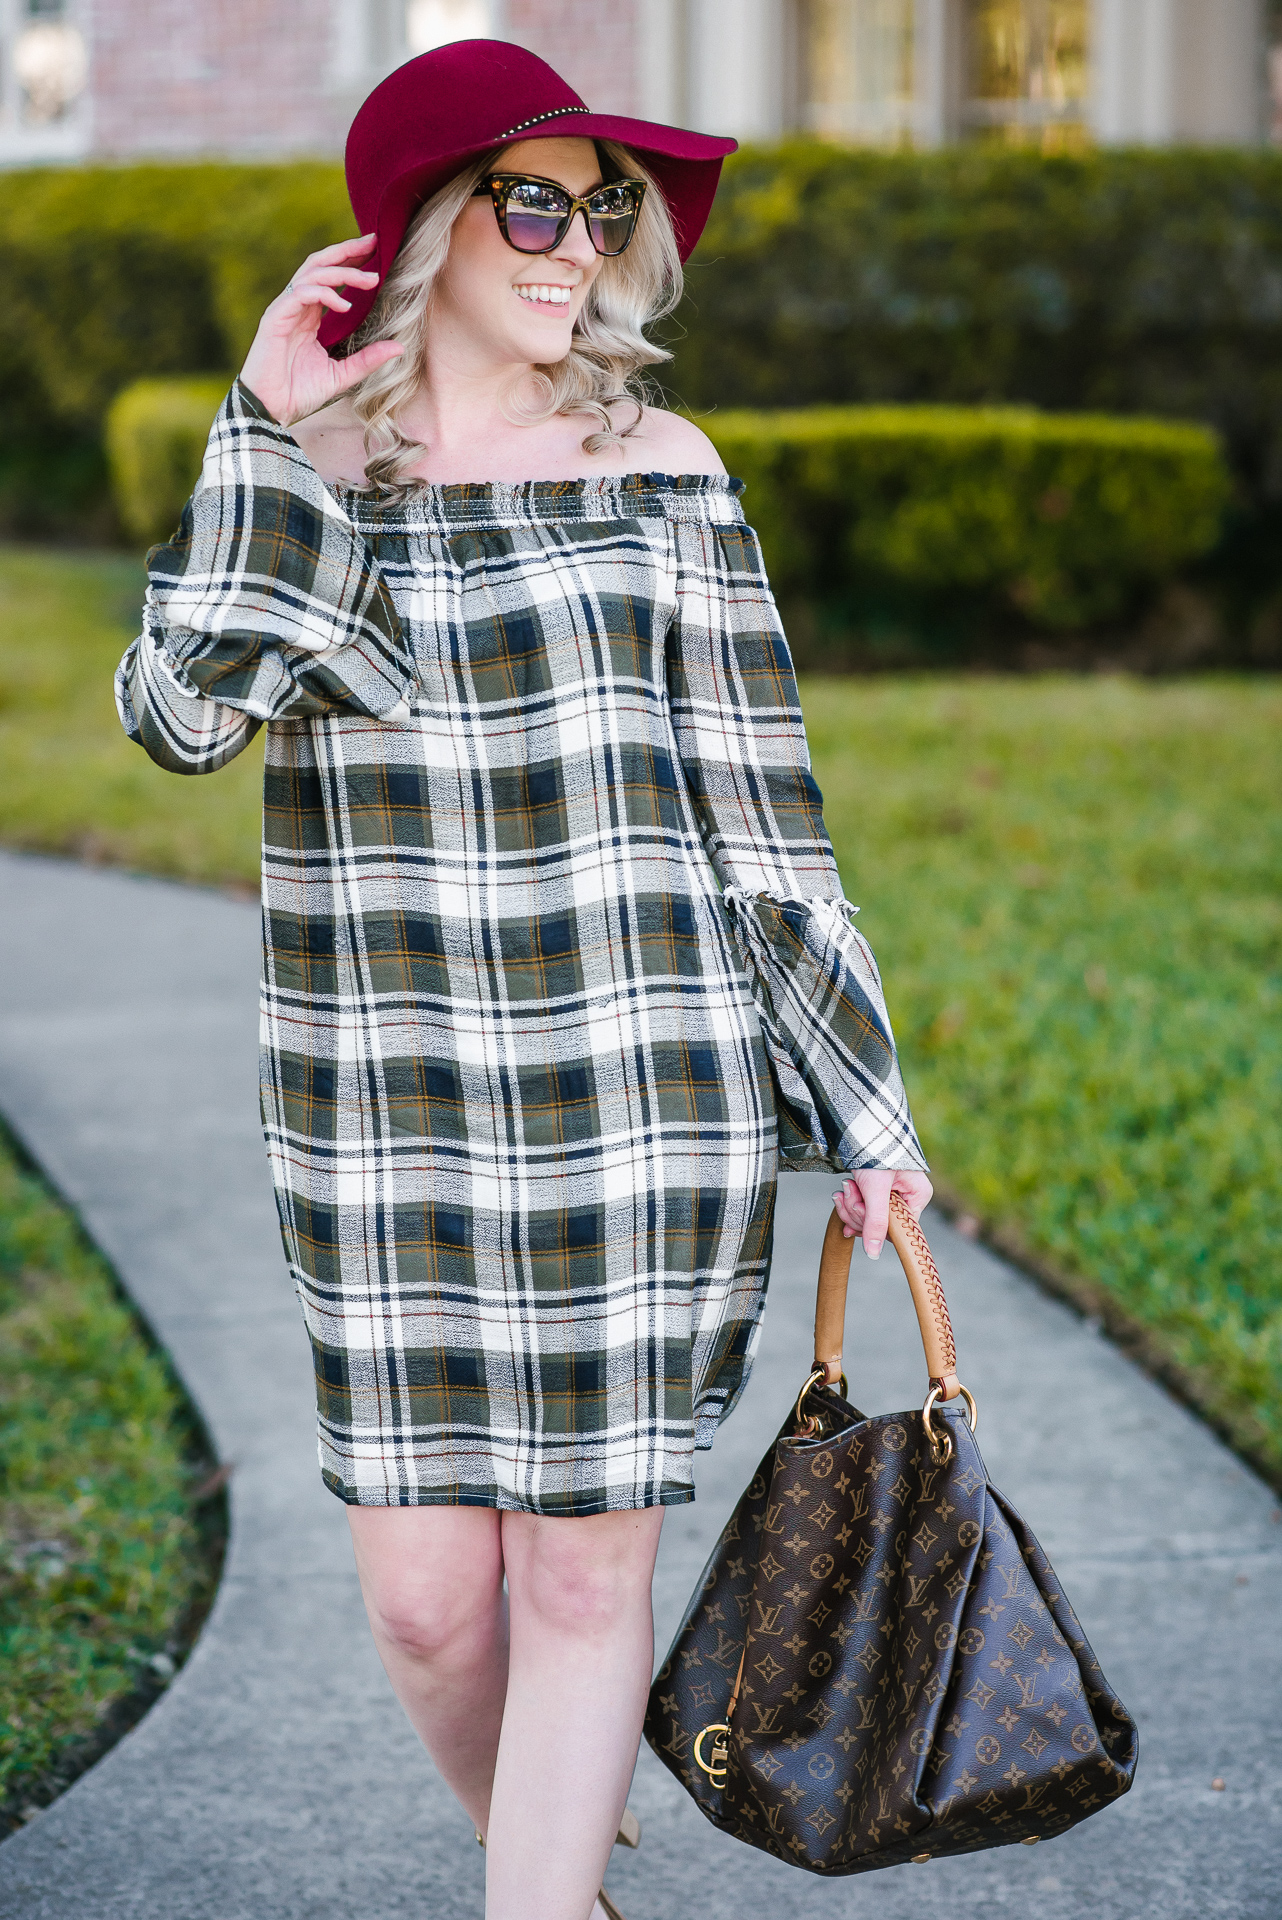 Thanksgiving Off The Shoulder Dress by Houston fashion blogger Gracefully Sassy